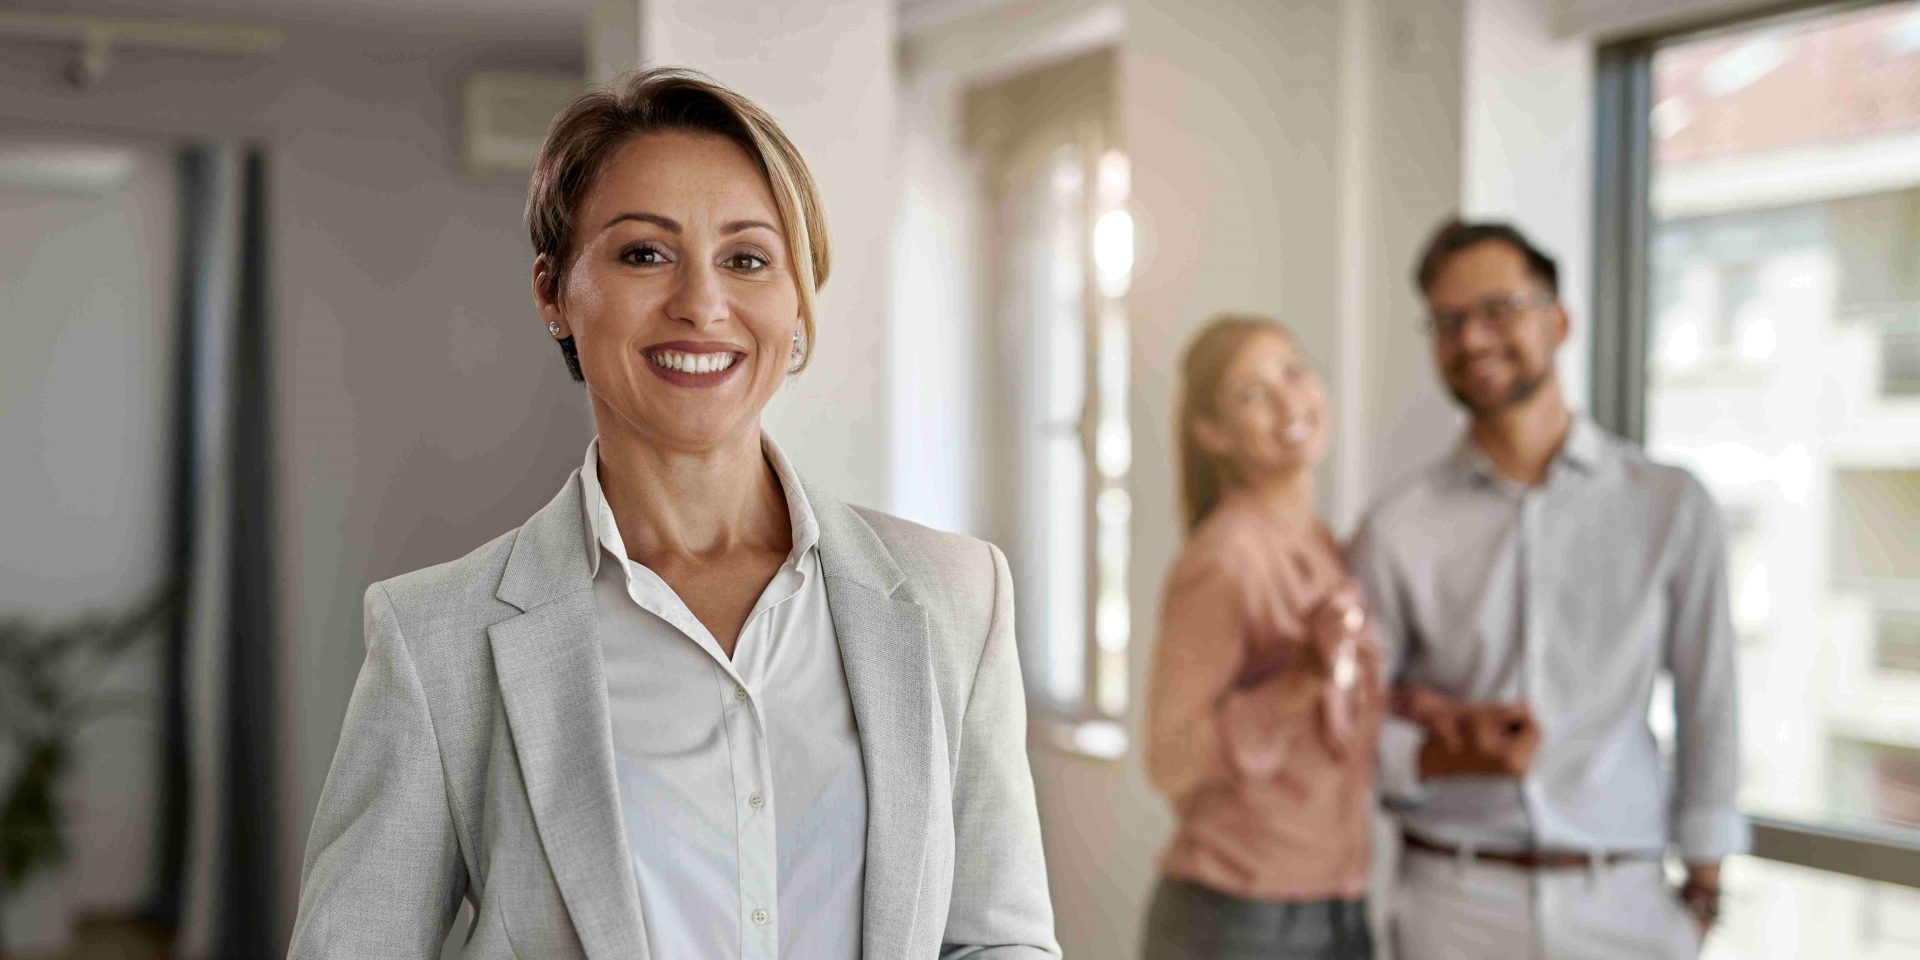 Female real estate agent standing in a house with a couple smiling behind her